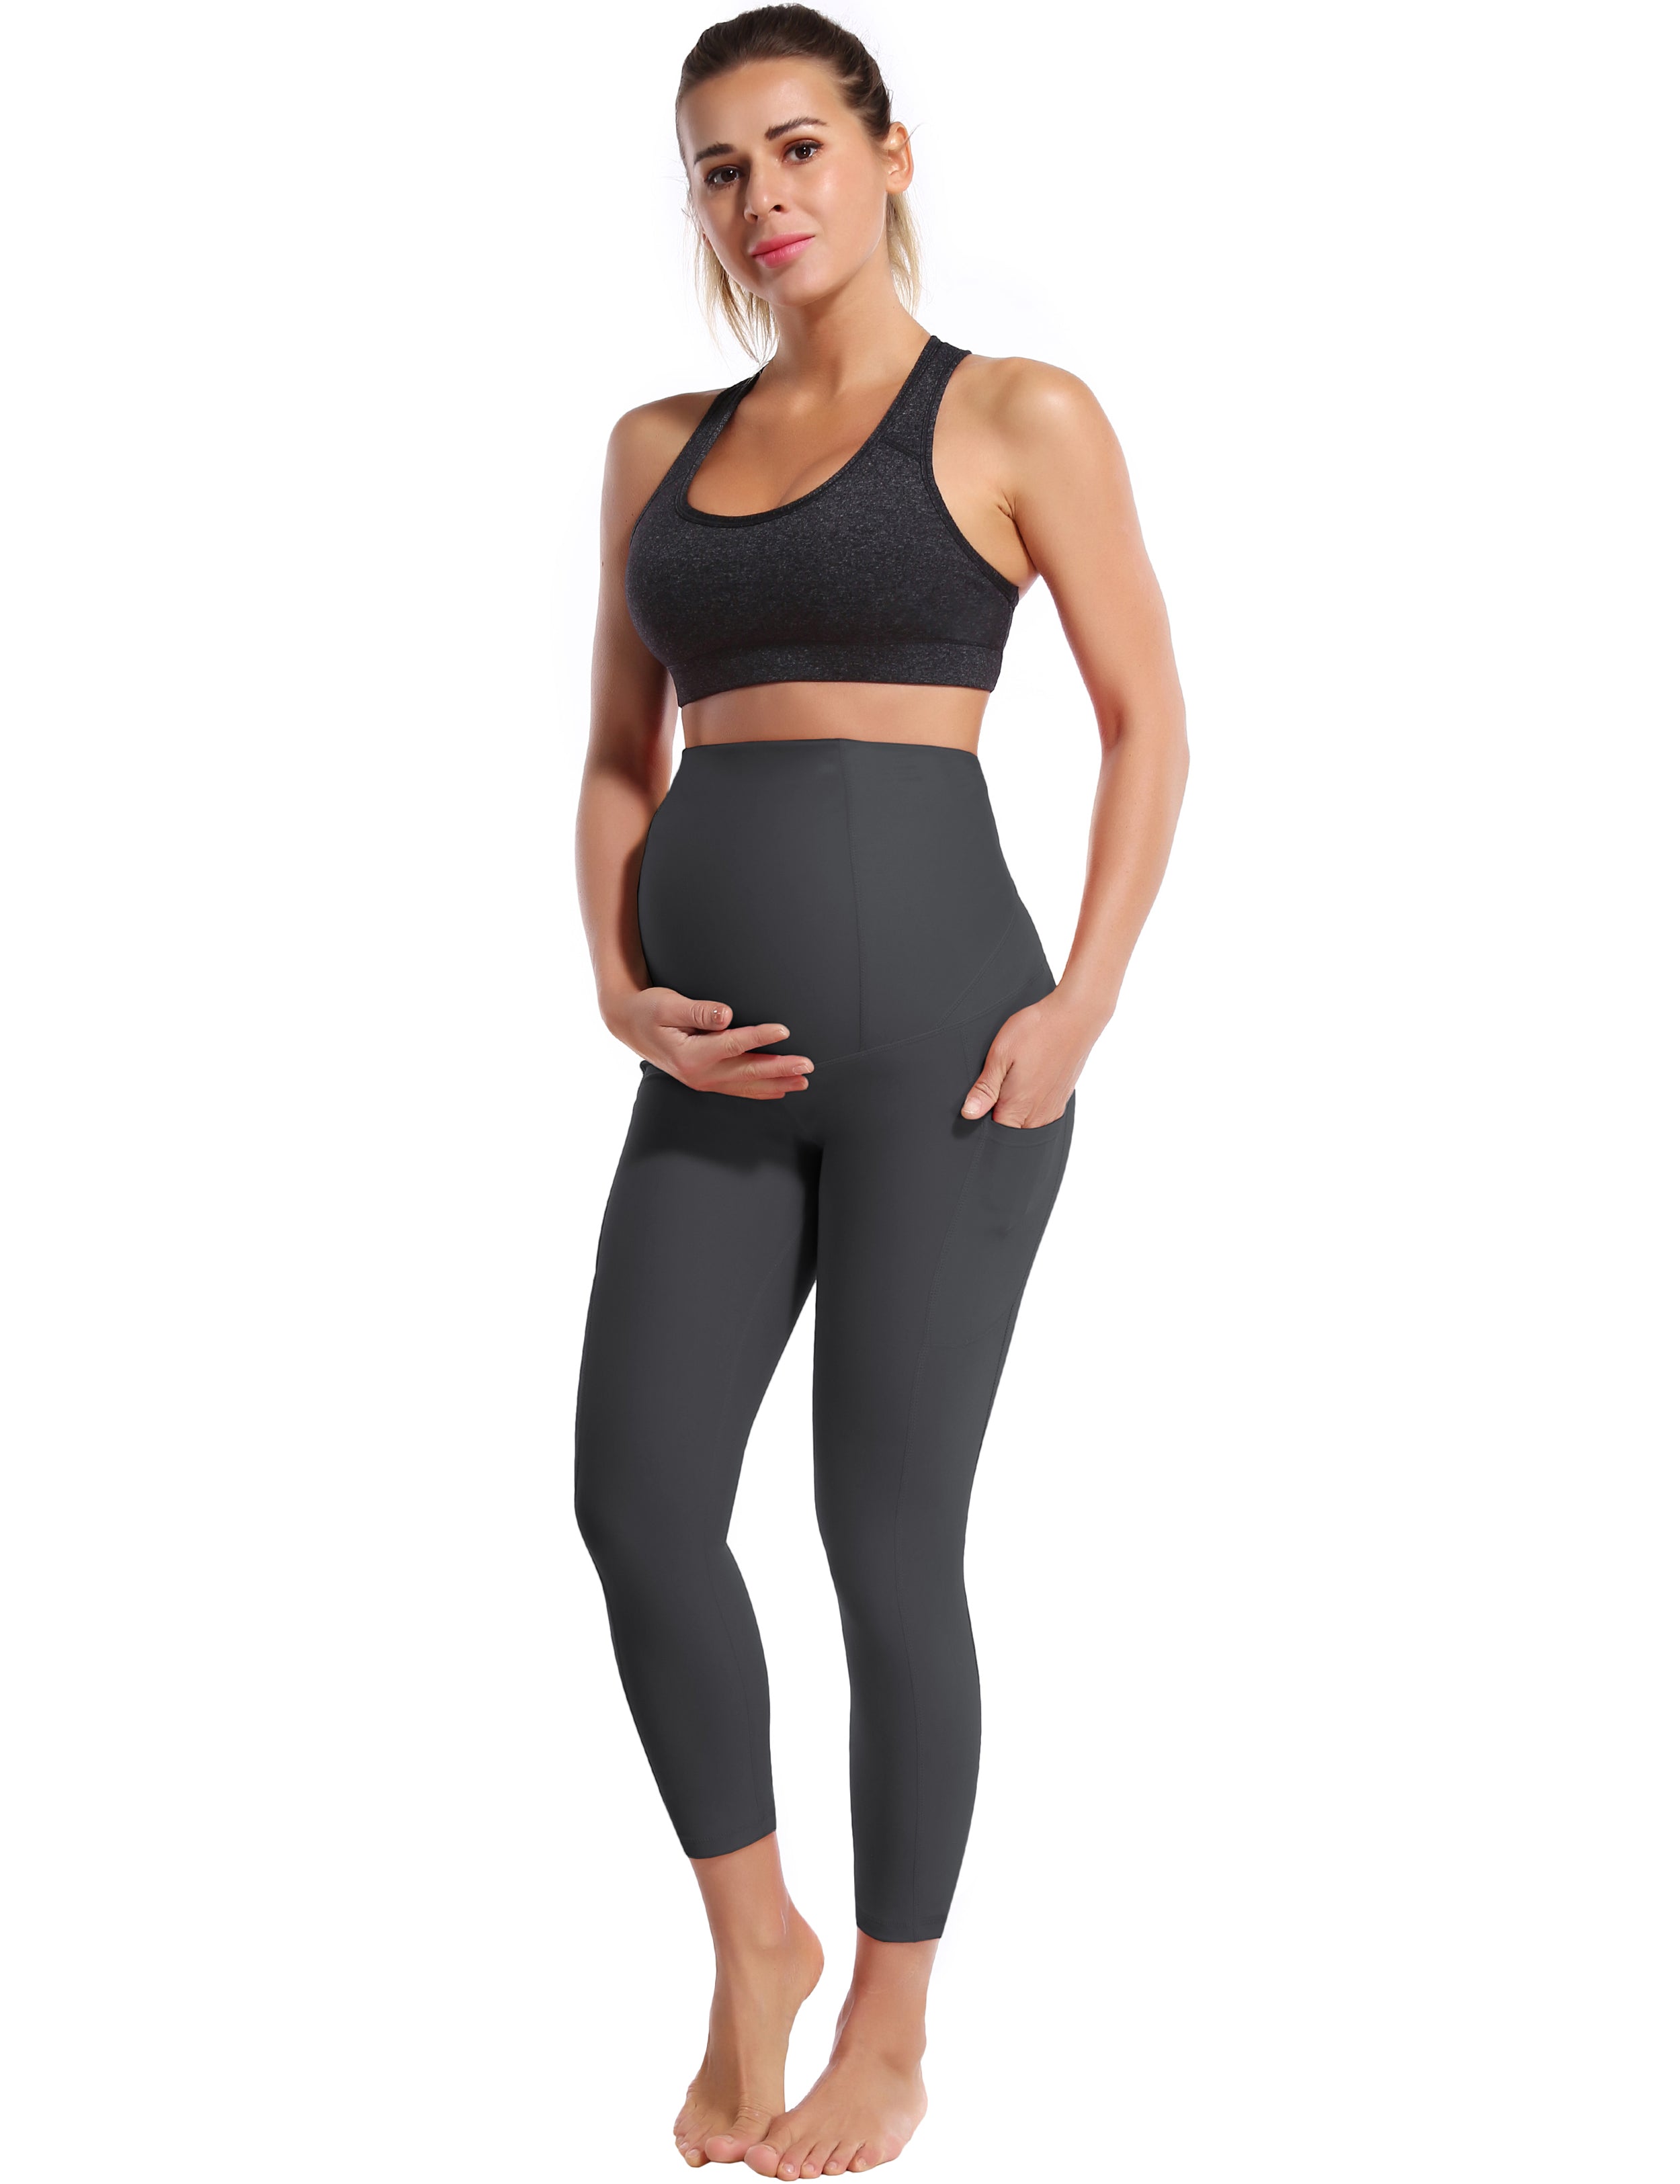 Supacore Jenny Pregnancy Support Leggings relieves pelvic pain